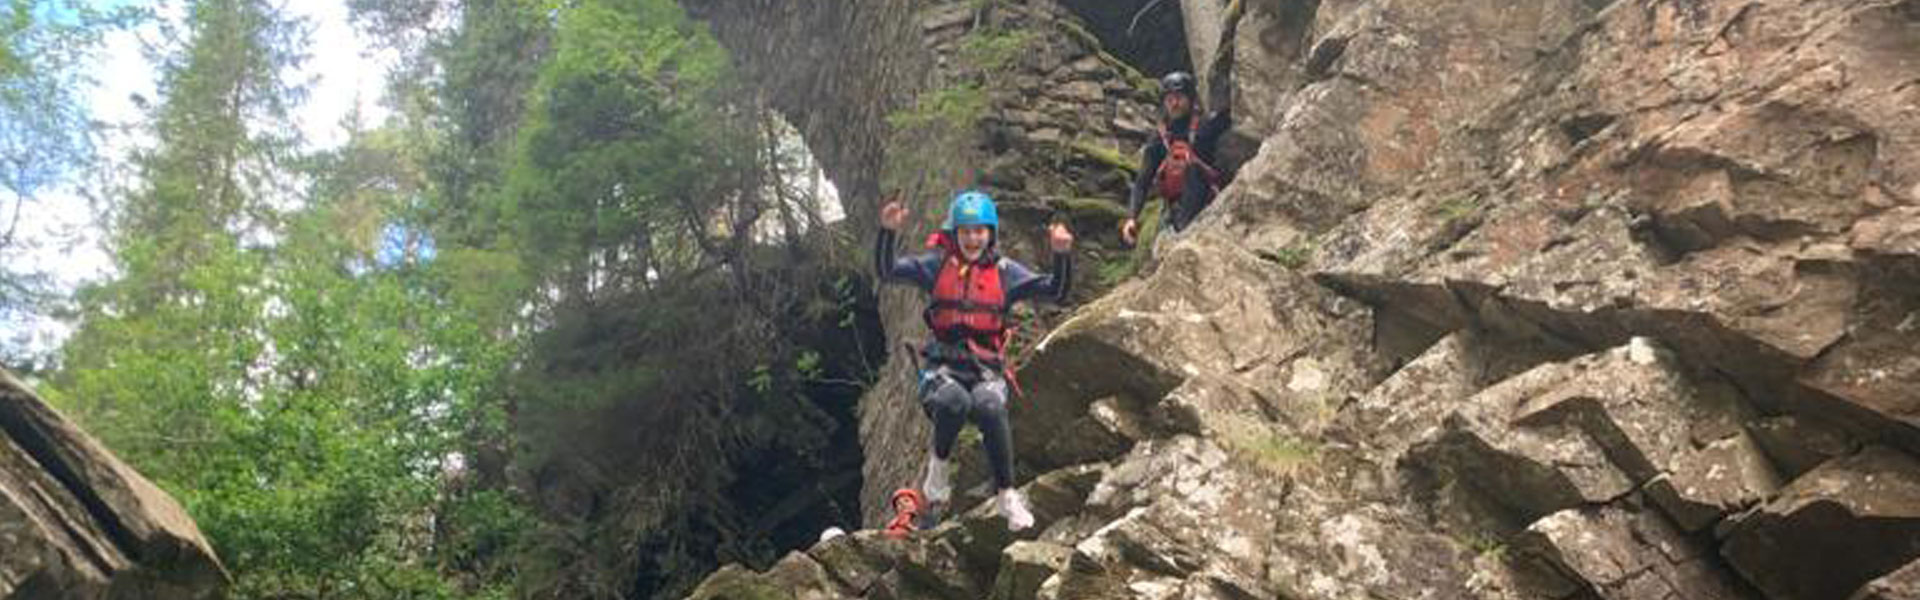 Canyoning adventure at Bruar Falls in Scotland with Active Outdoor Pursuits